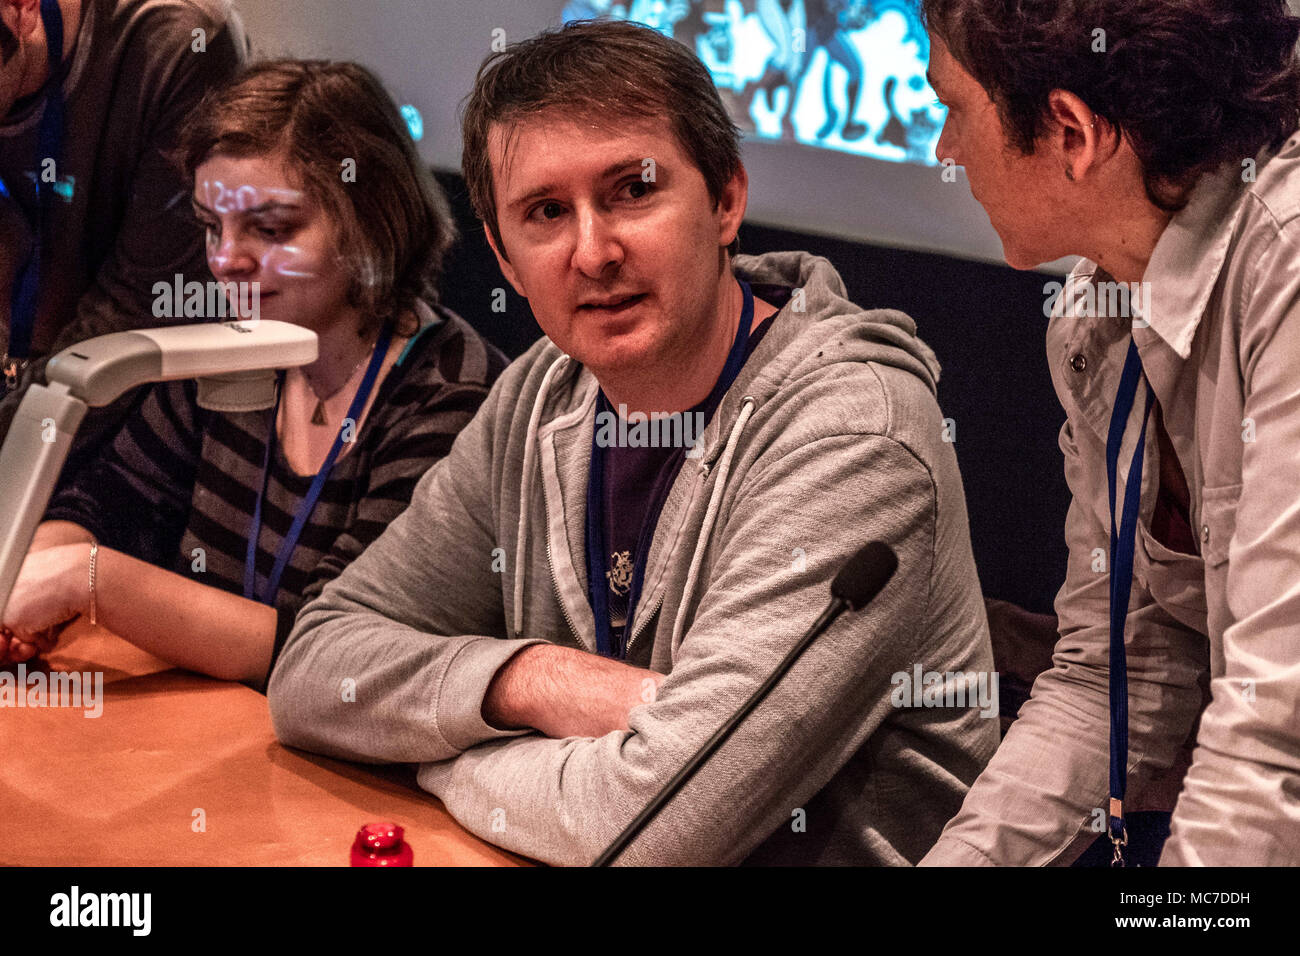 Barcelona, Catalonia, Spain. 13th Apr, 2018. French cartoonist Souillon, author of the character Maliki during his master class for school children. The36th Barcelona International Comic Fair from 12th-15th April 2018 in Fira Barcelona MontjuÃ¯c. Credit: Paco Freire/SOPA Images/ZUMA Wire/Alamy Live News Stock Photo